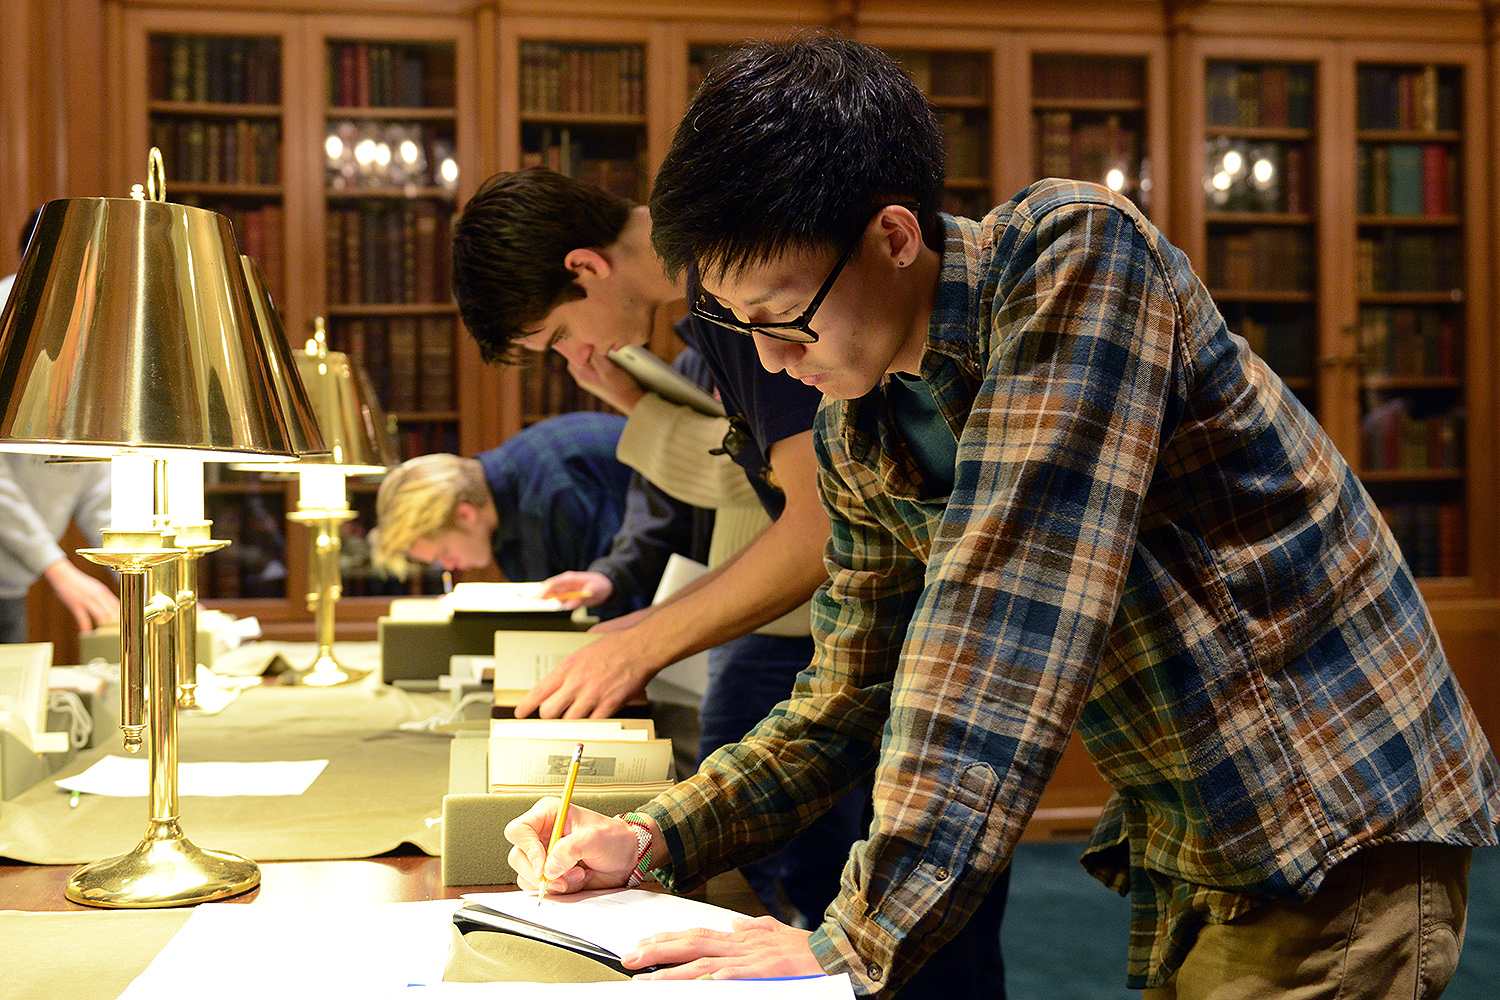 On Nov. 10, the Social and Political Changes in Korea class met at Wesleyan's Special Collections & Archives to examine archival materials on missionaries to Korea (and East Asia).